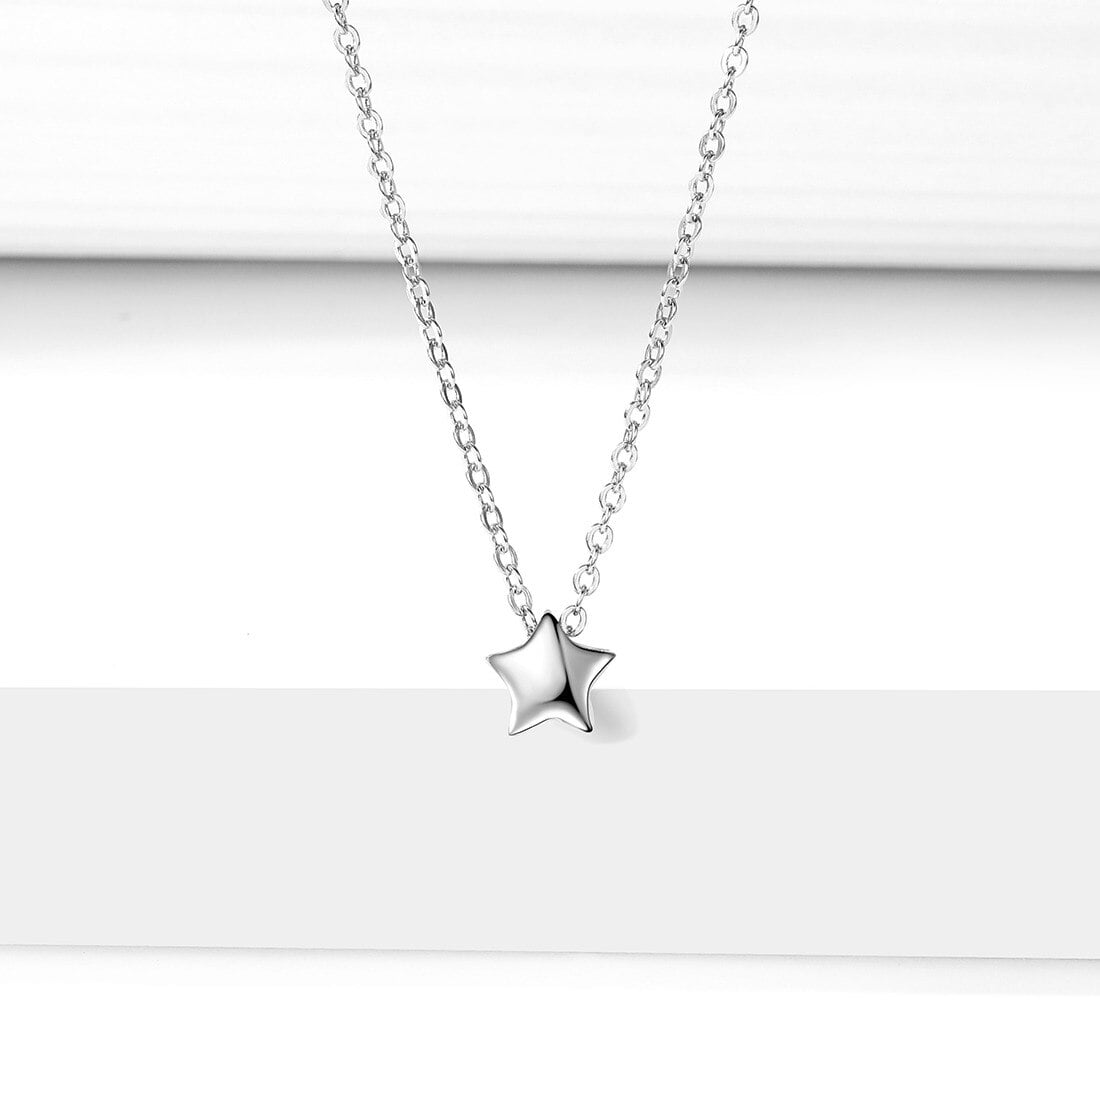 STORUP Birthday Gifts for Girls Necklace, S925 Sterling Silver Pendant CZ Heart Necklace for 5th 6th 7th 8th 9th 10th 11th 12th 13th 14th 15th 16th